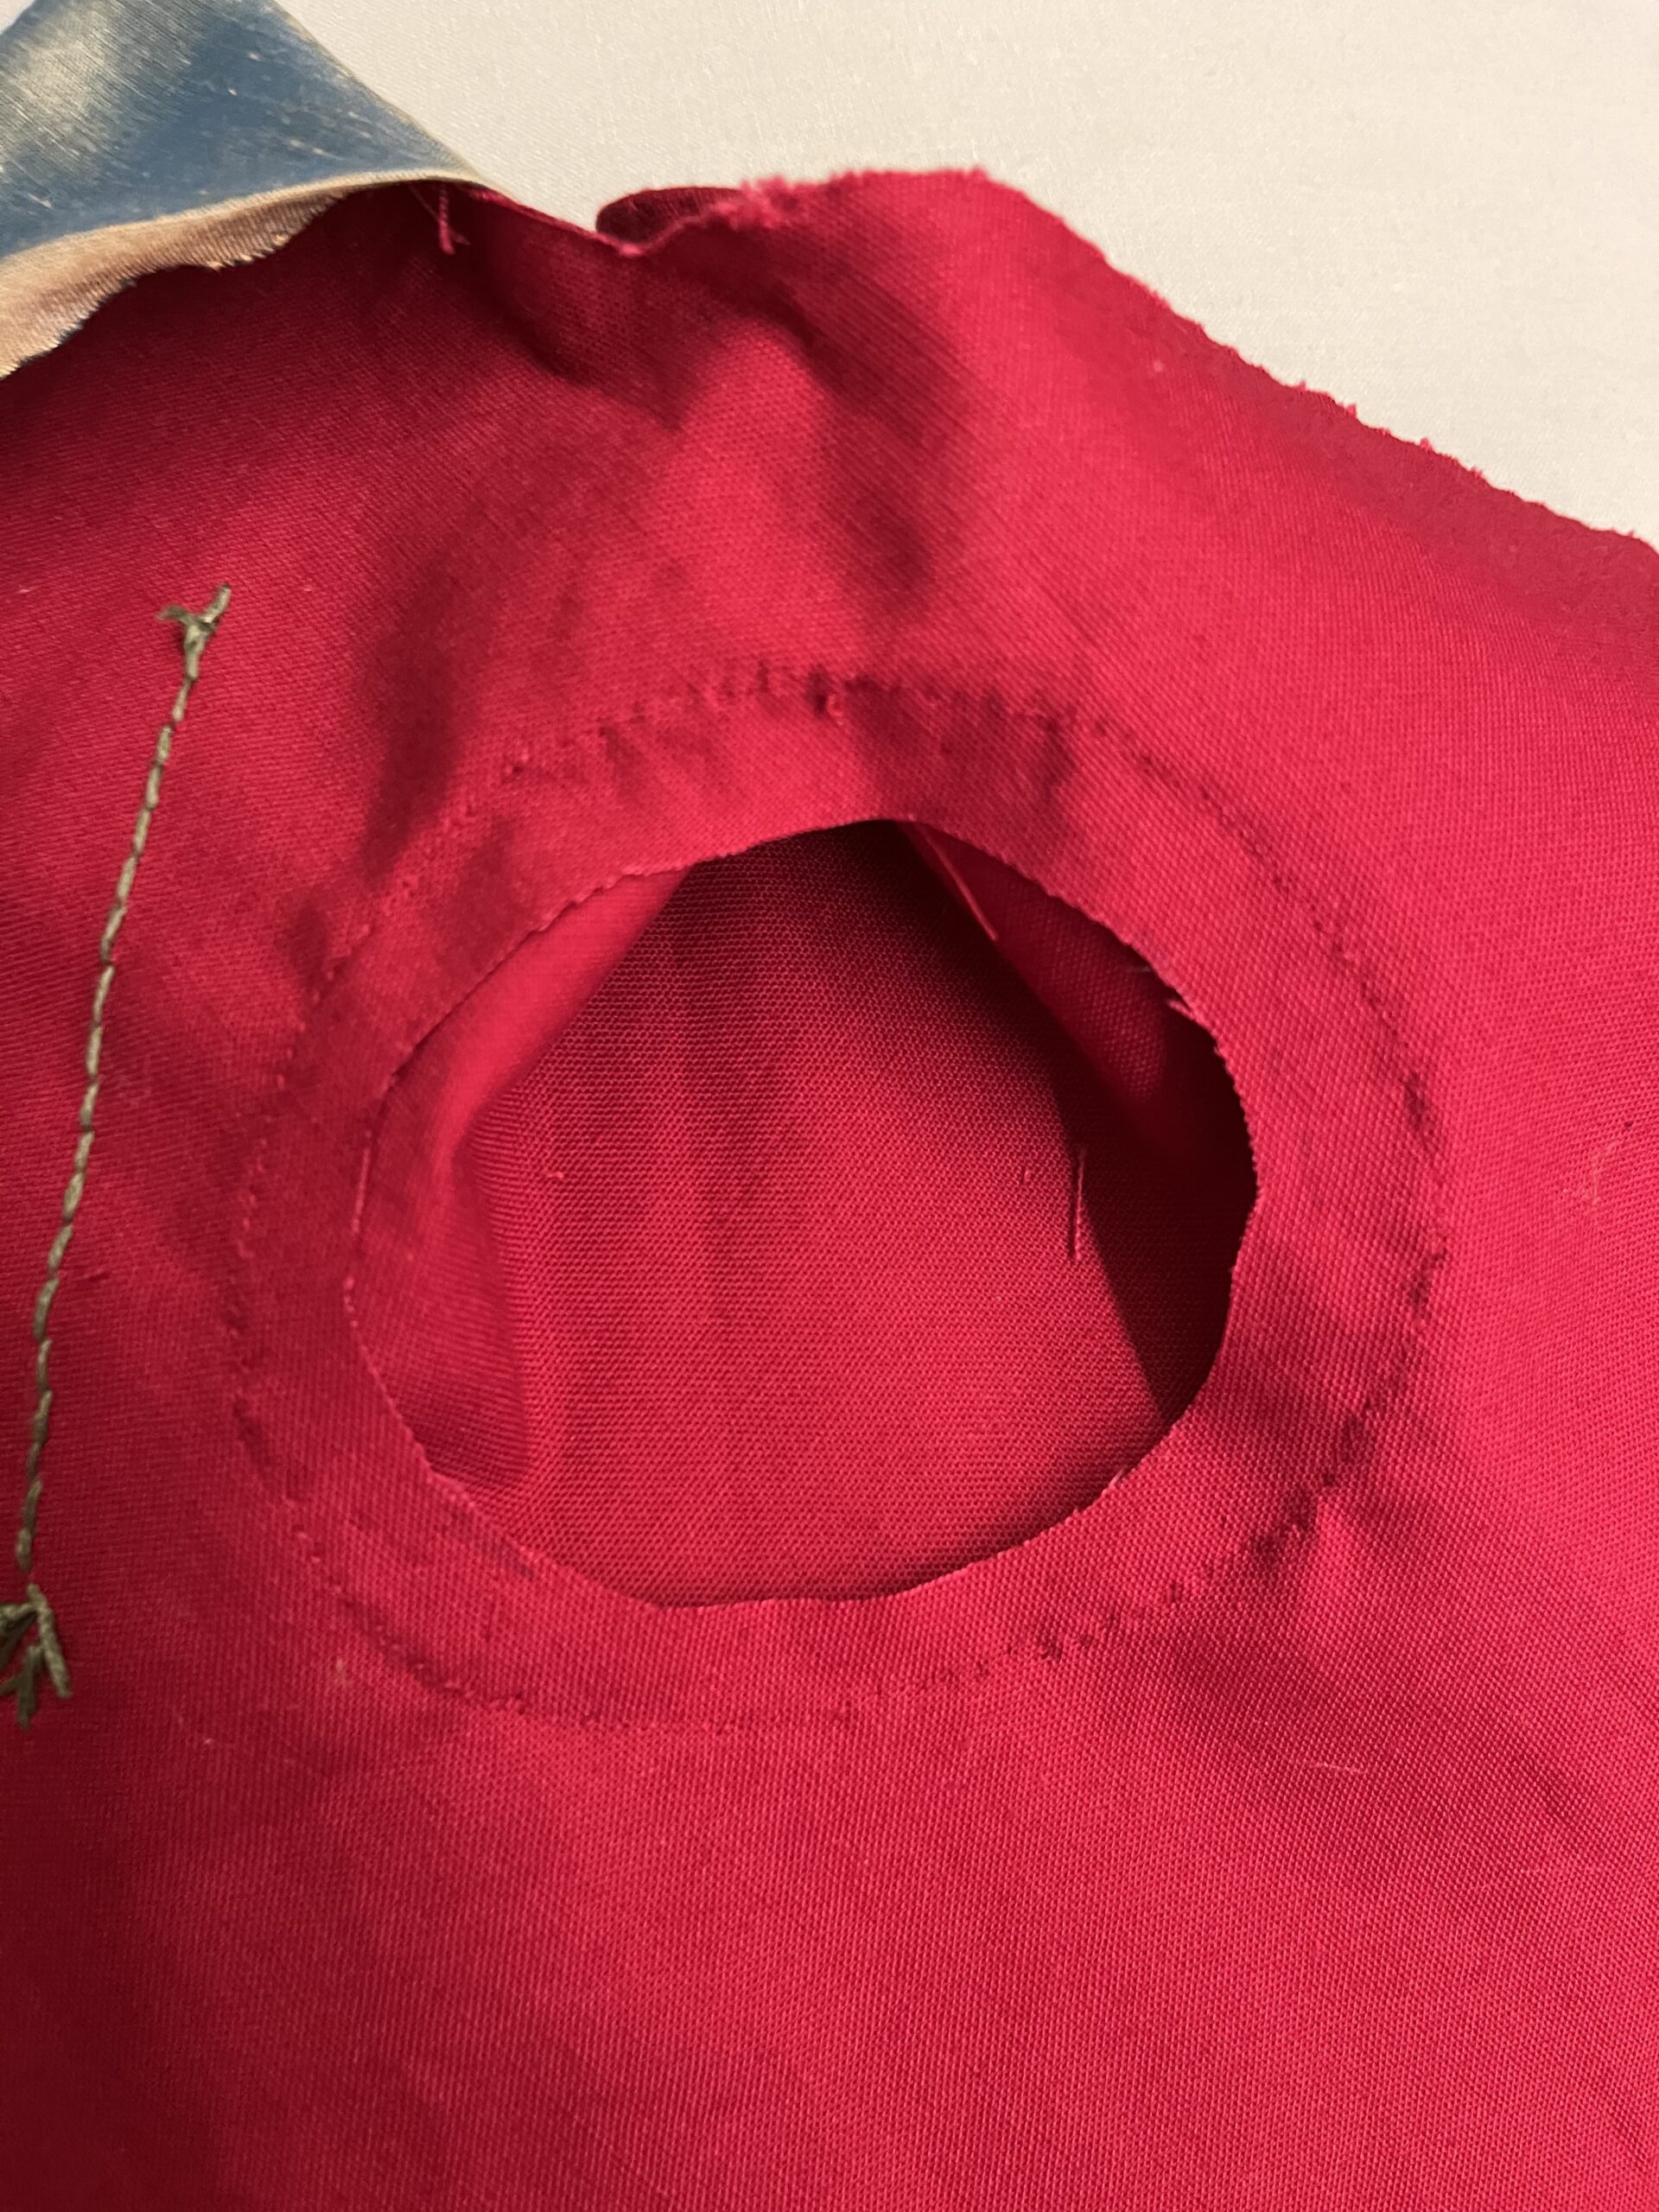 The inside of the thumb hole of a red 18th century mitt with the stitching line showing.